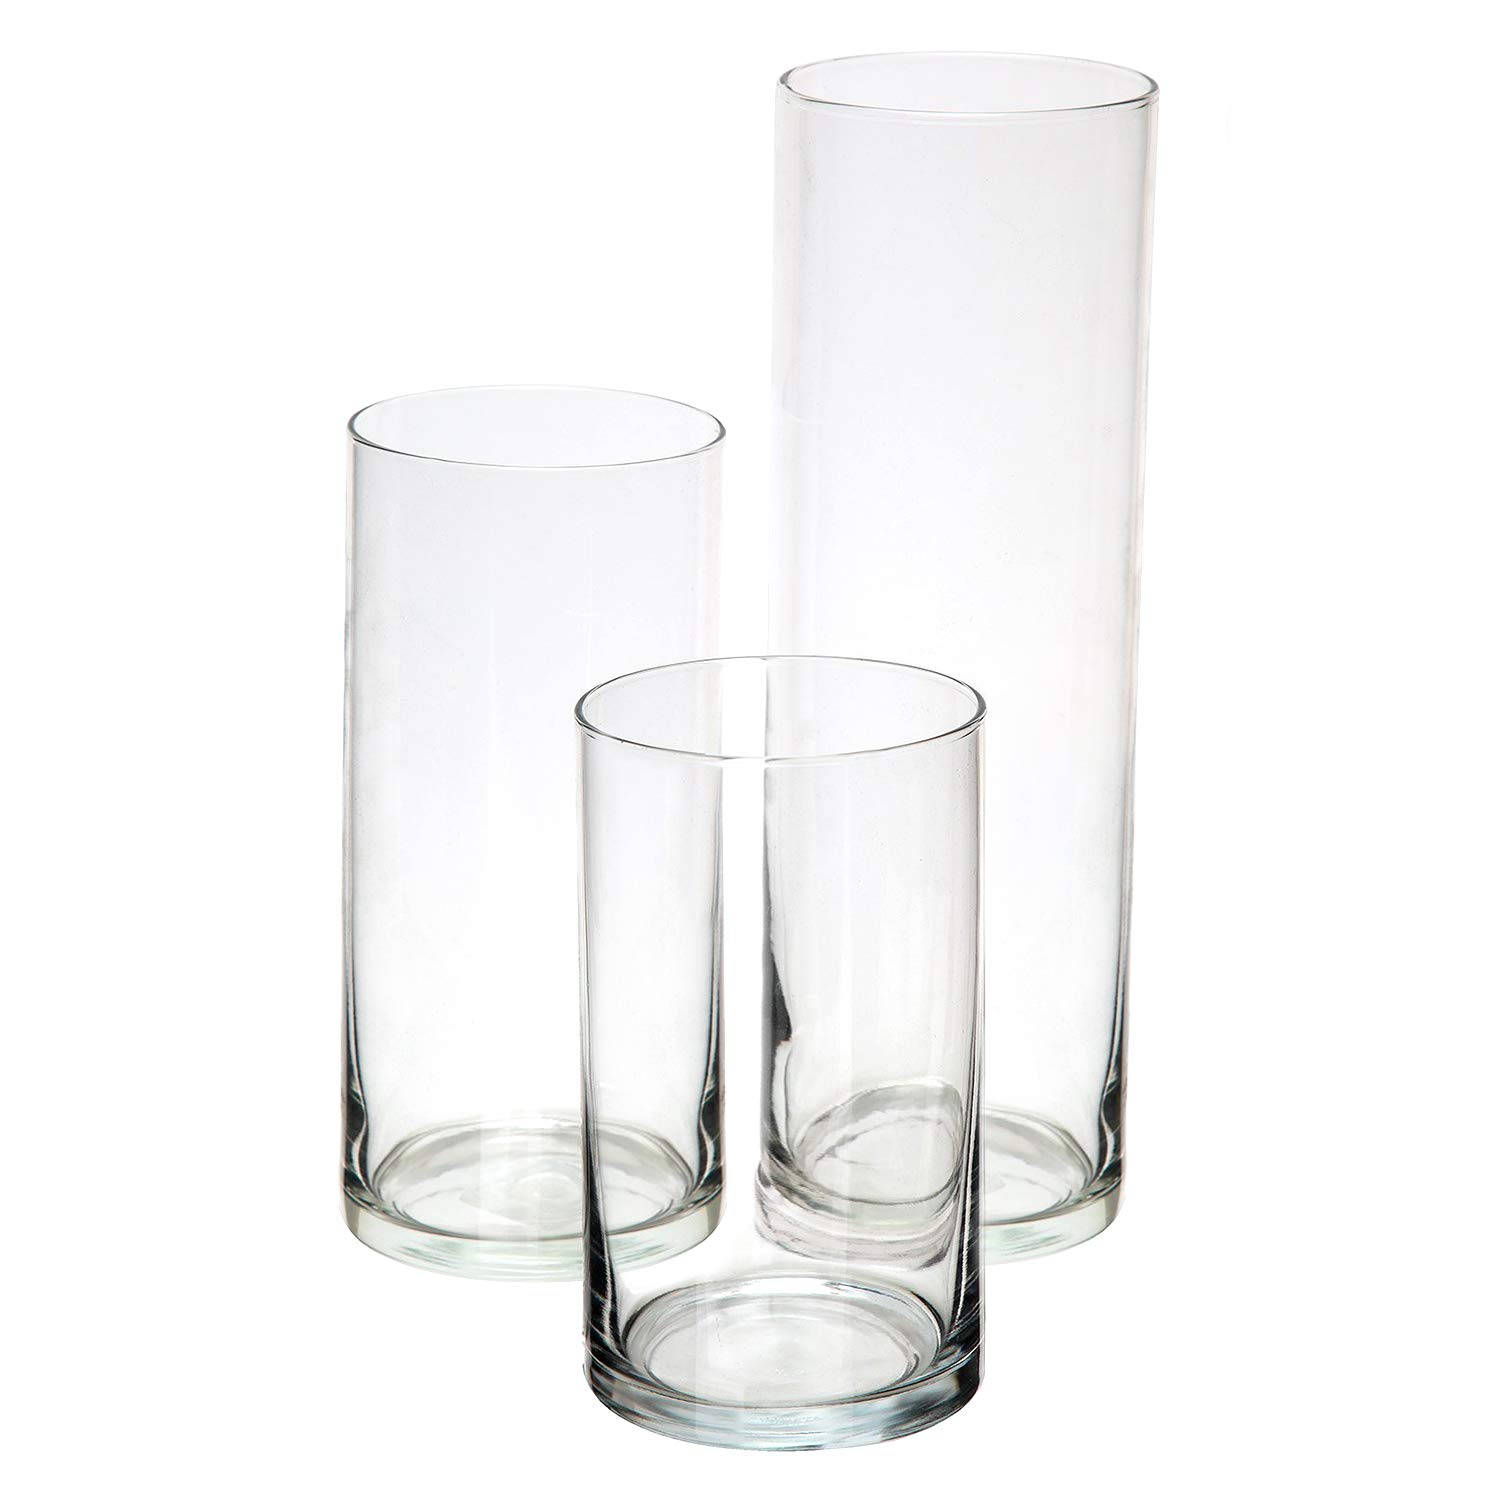 Glass Cylinder Vases Centerpieces for Home Table Decor